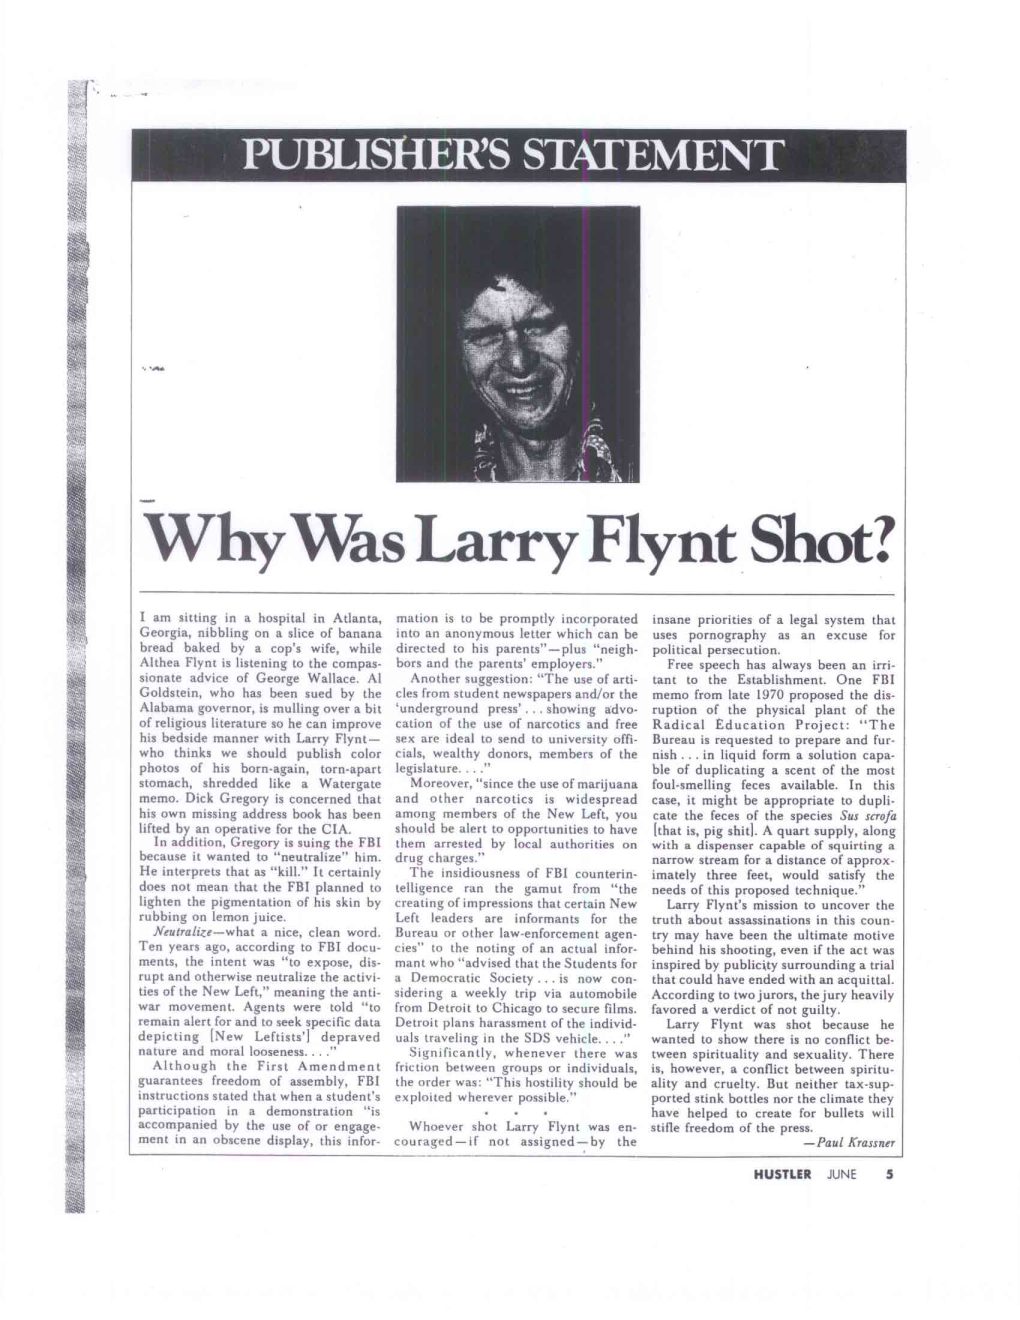 Why Was Larry Flynt Shot?